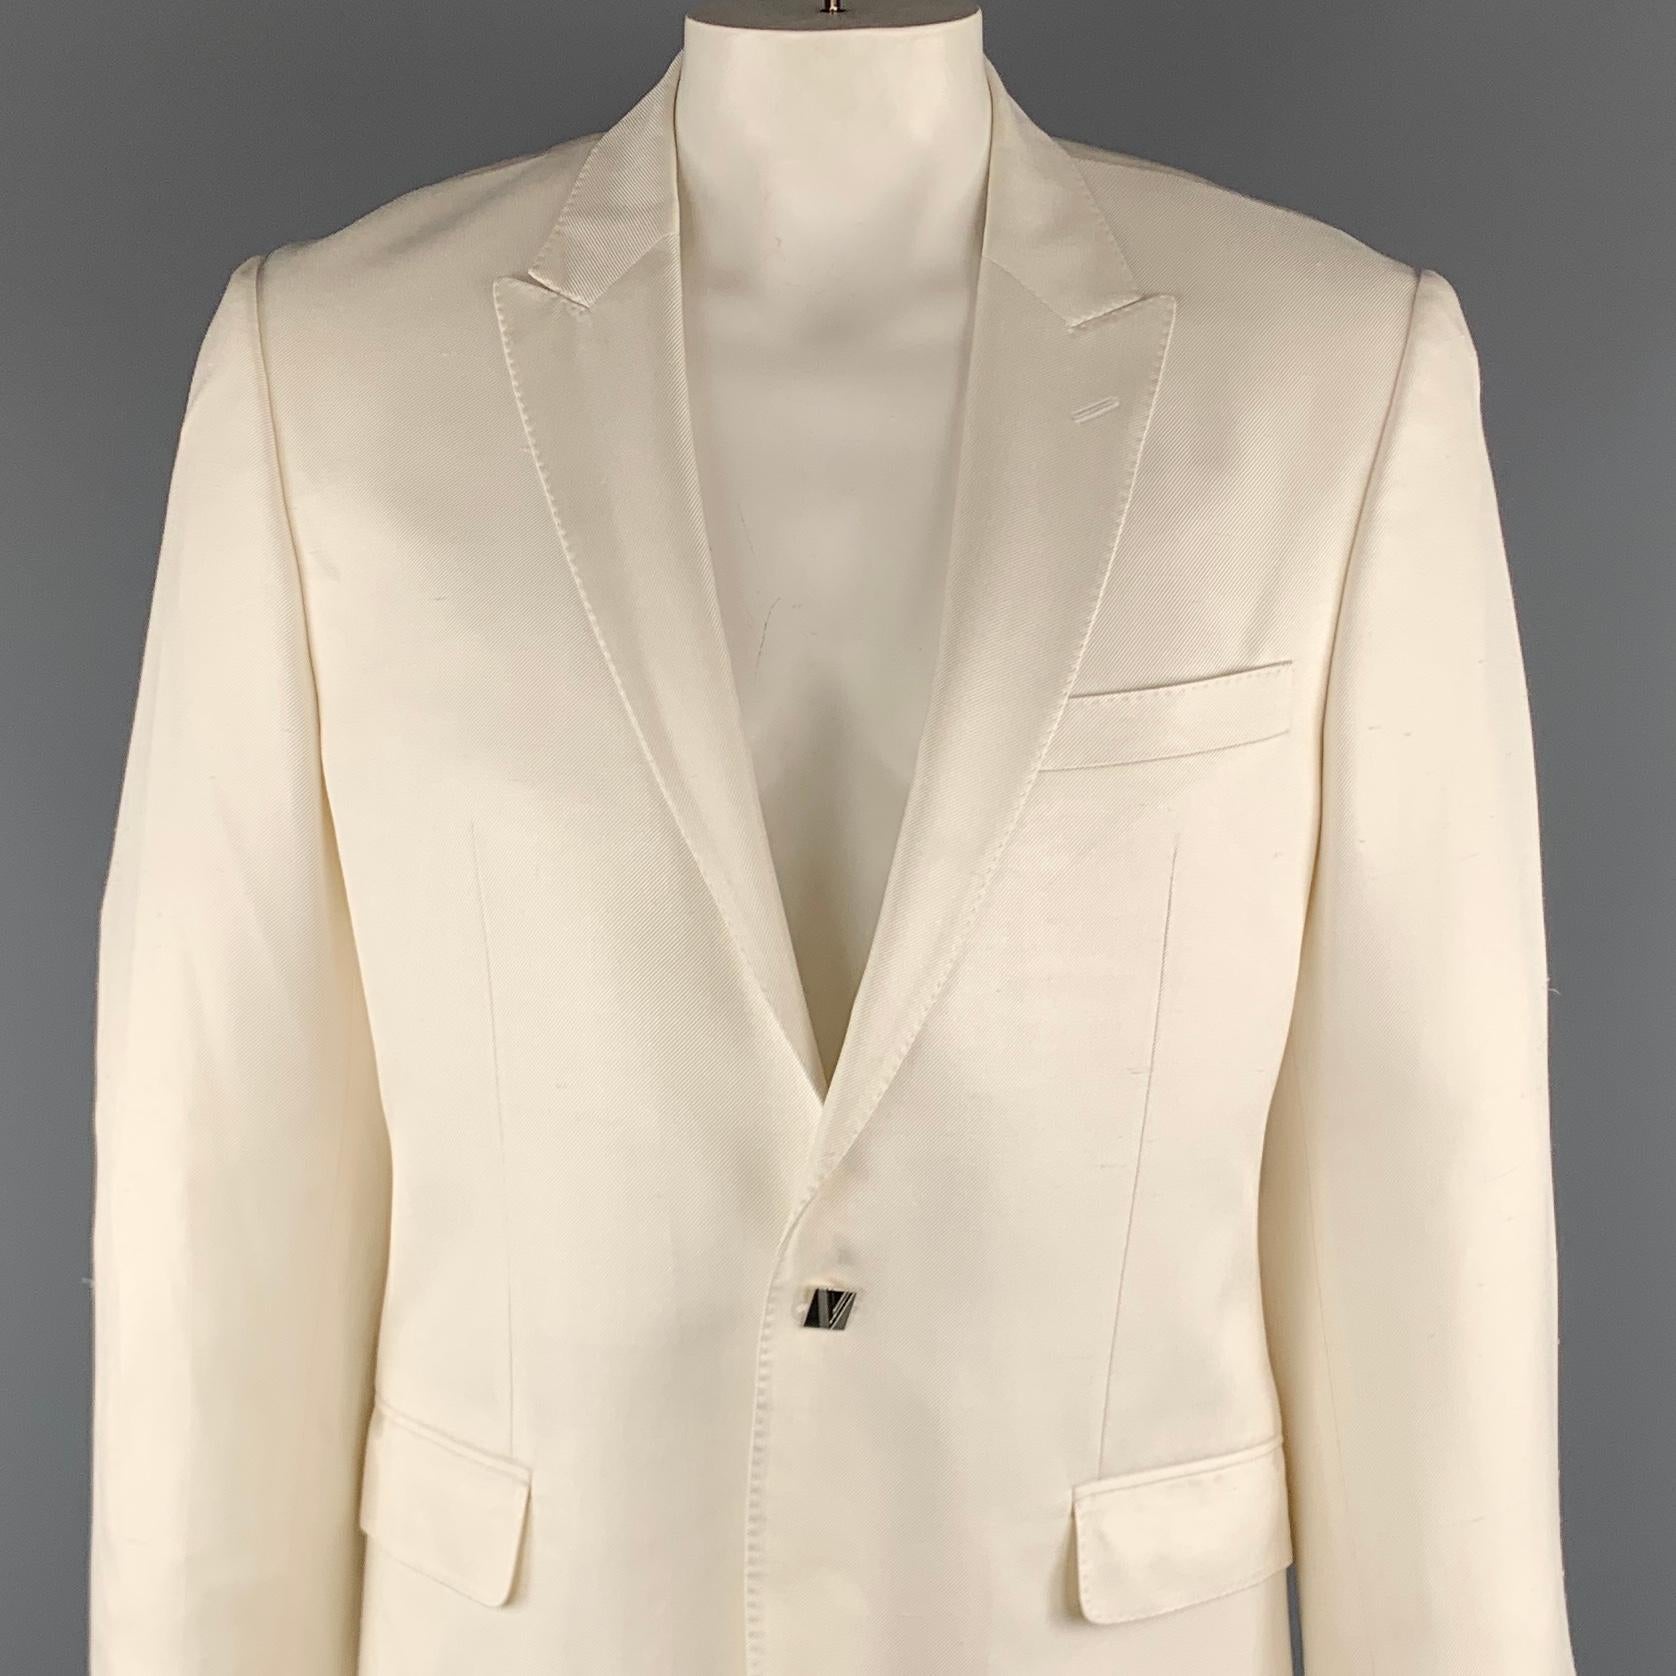 VERSACE COLLECTION Sport Coat comes in a off white textured silk featuring a peak lapel style, flap pockets, and a silver tone 